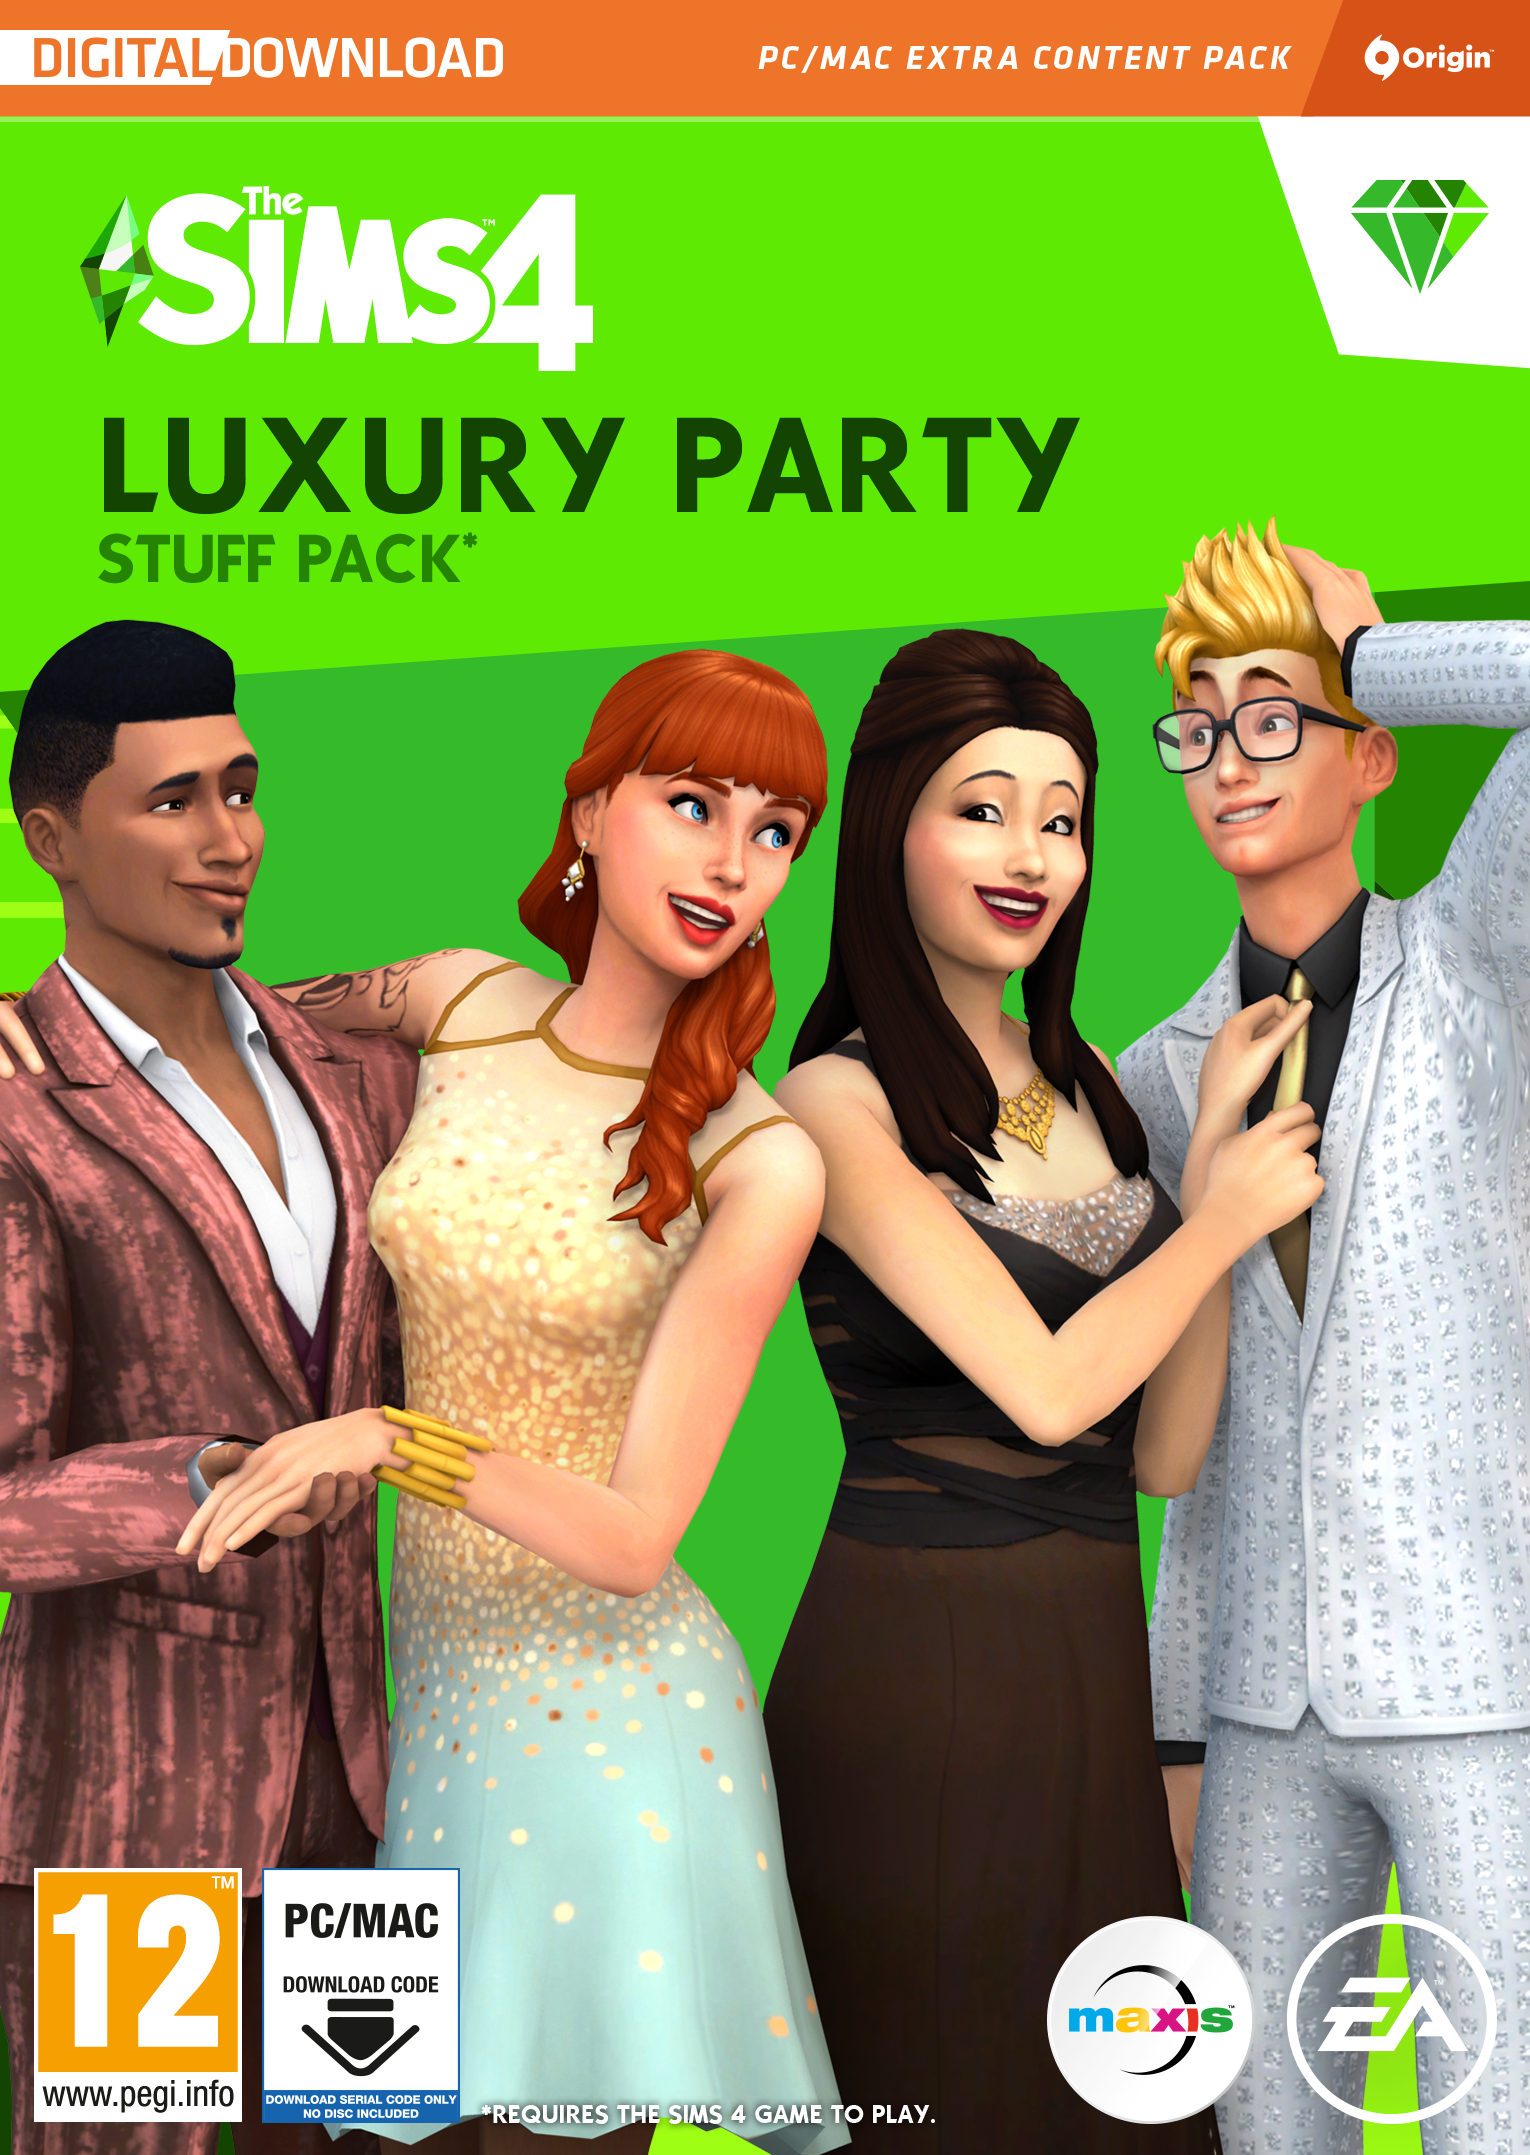 THE SIMS 4 LUXURY PARTY STUFF PACK